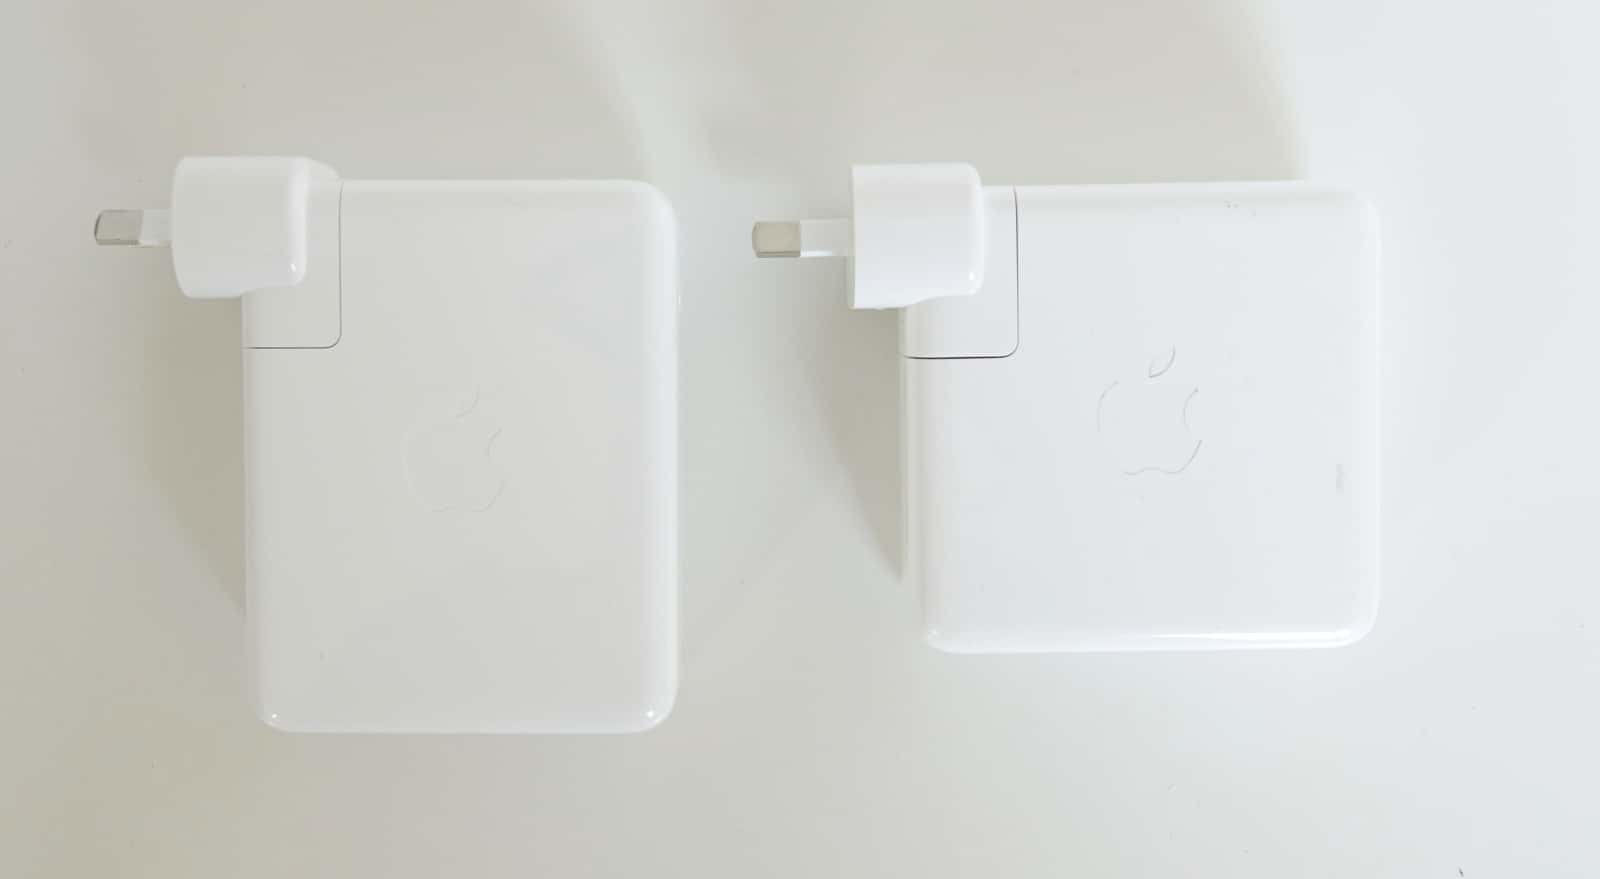 The size difference between the 140W charger of the M1 MBP 16 (left) and the 96W of the Intel MBP 16 (right).